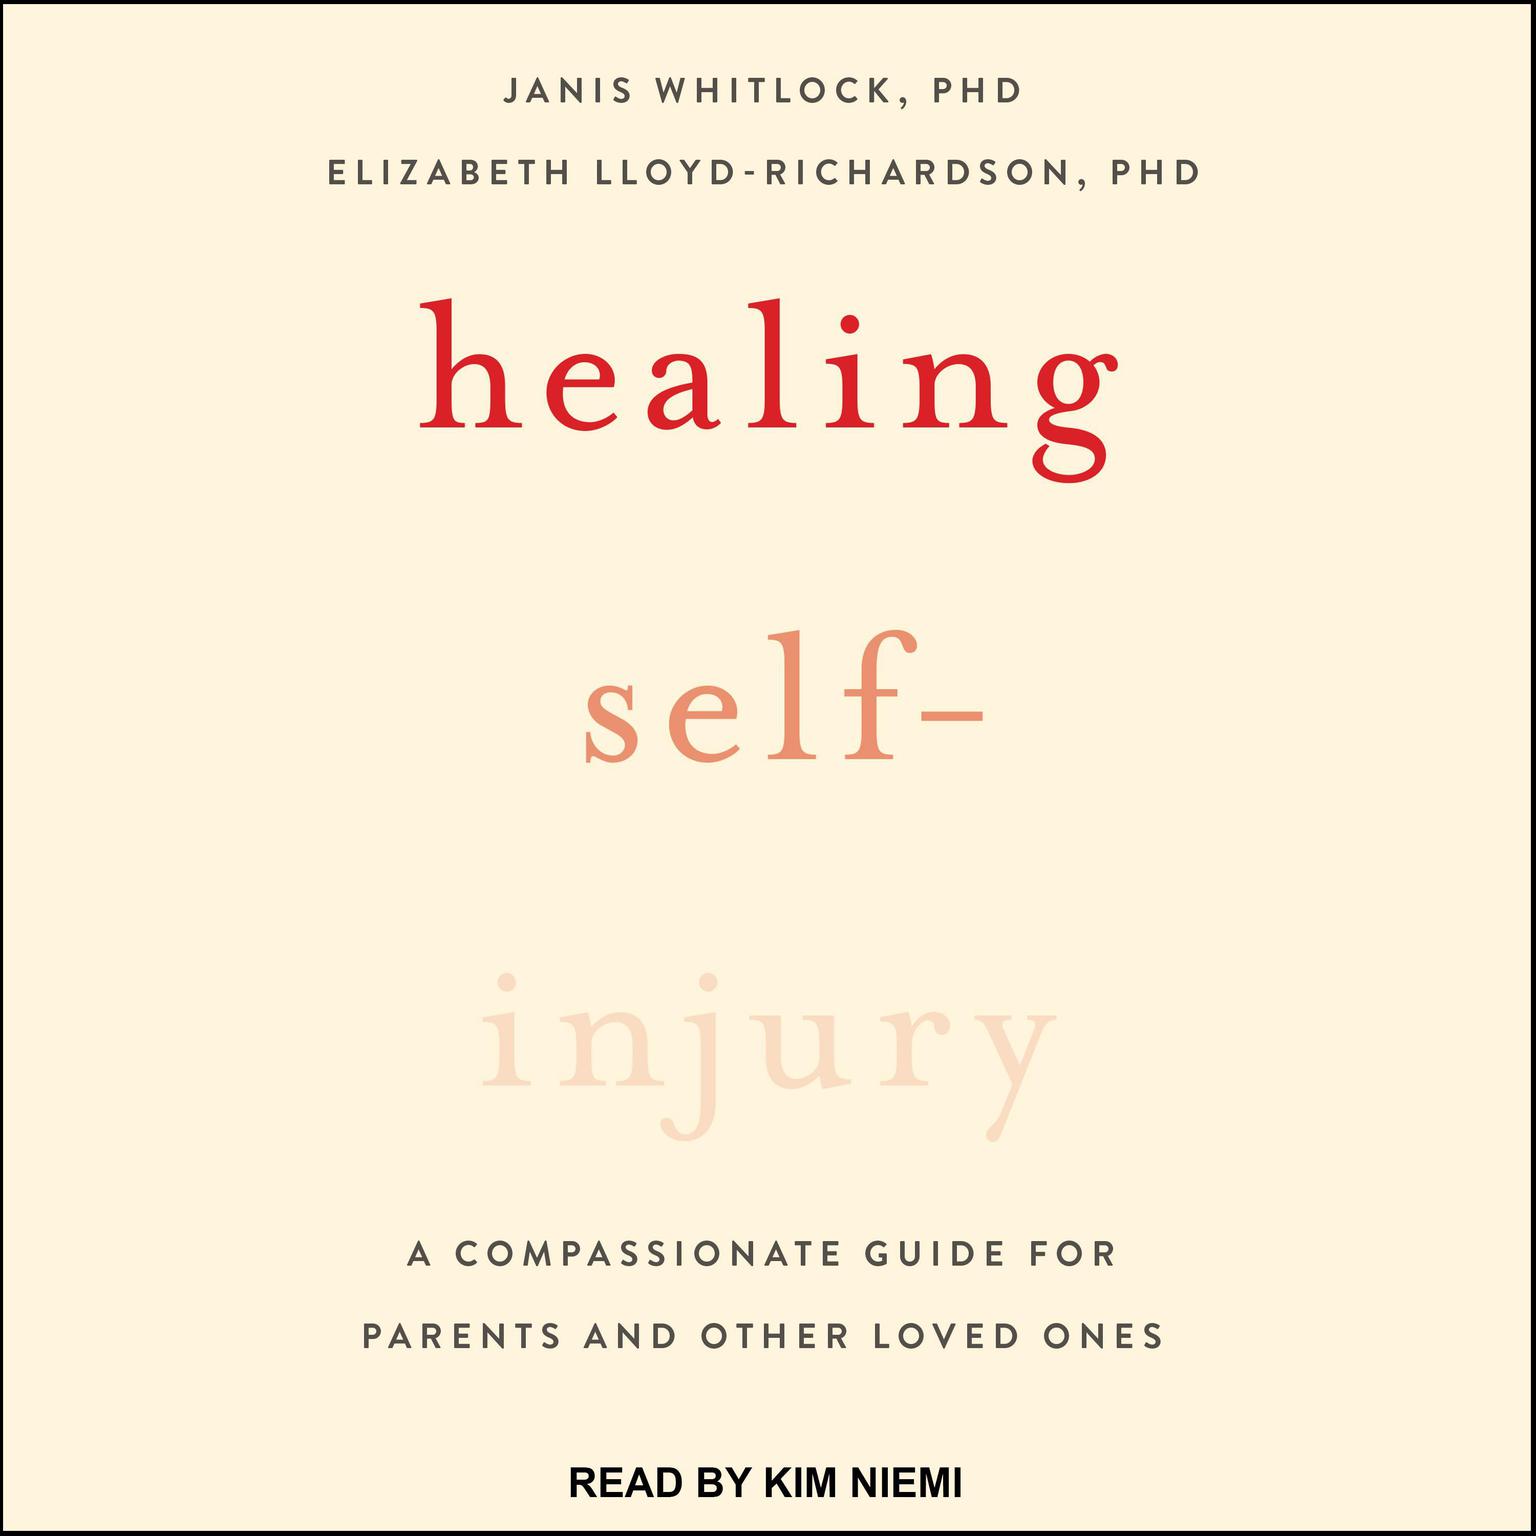 Healing Self-Injury: A Compassionate Guide for Parents and Other Loved Ones Audiobook, by Elizabeth Lloyd-Richardson